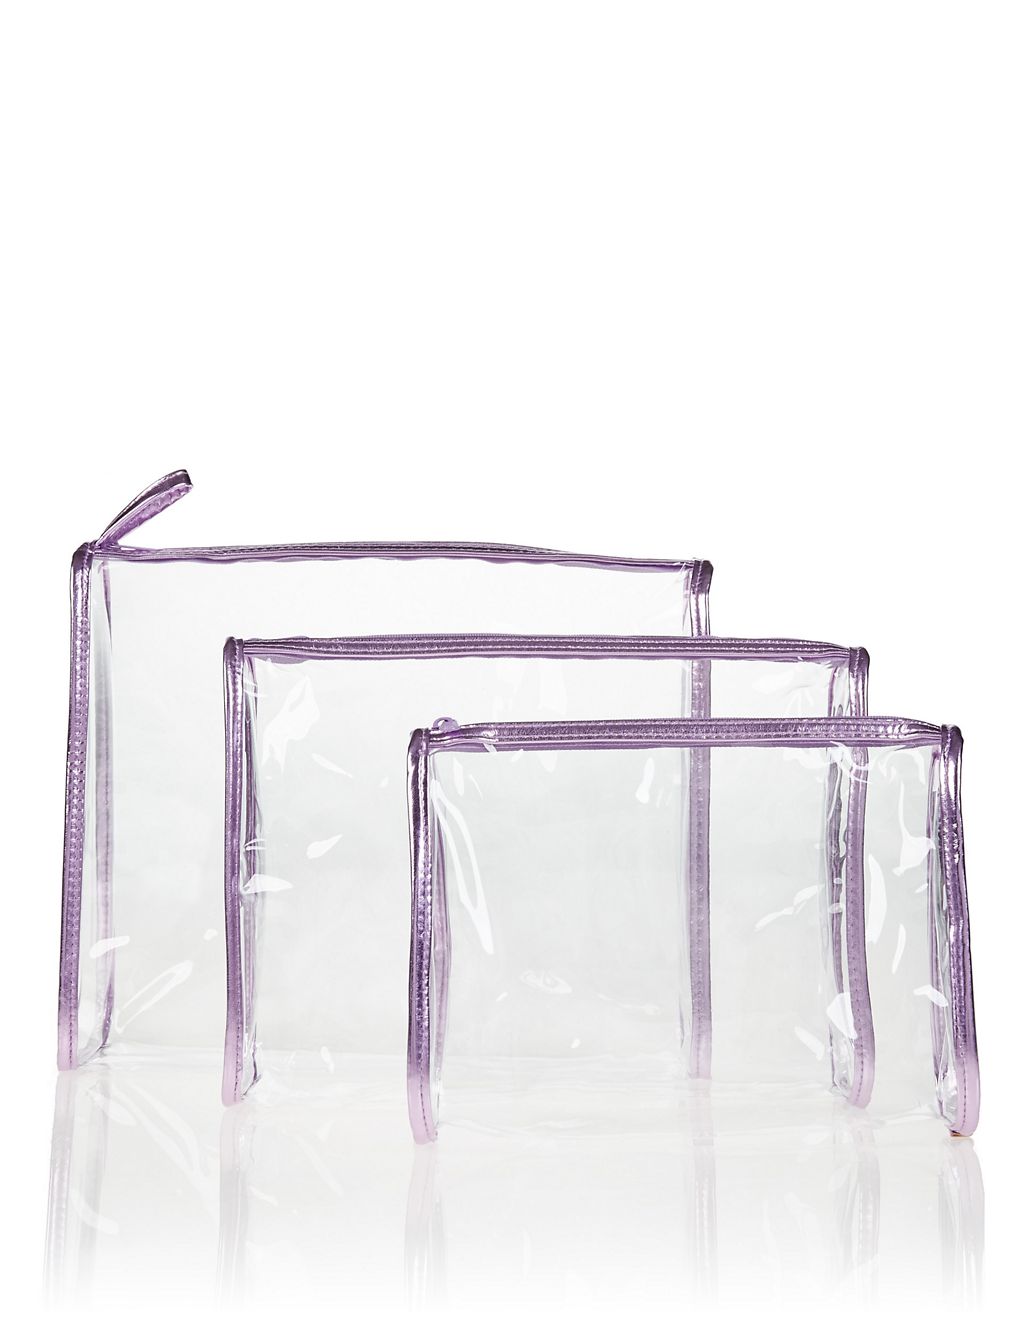 3 Piece Clear Cosmetic Bag Set 2 of 2